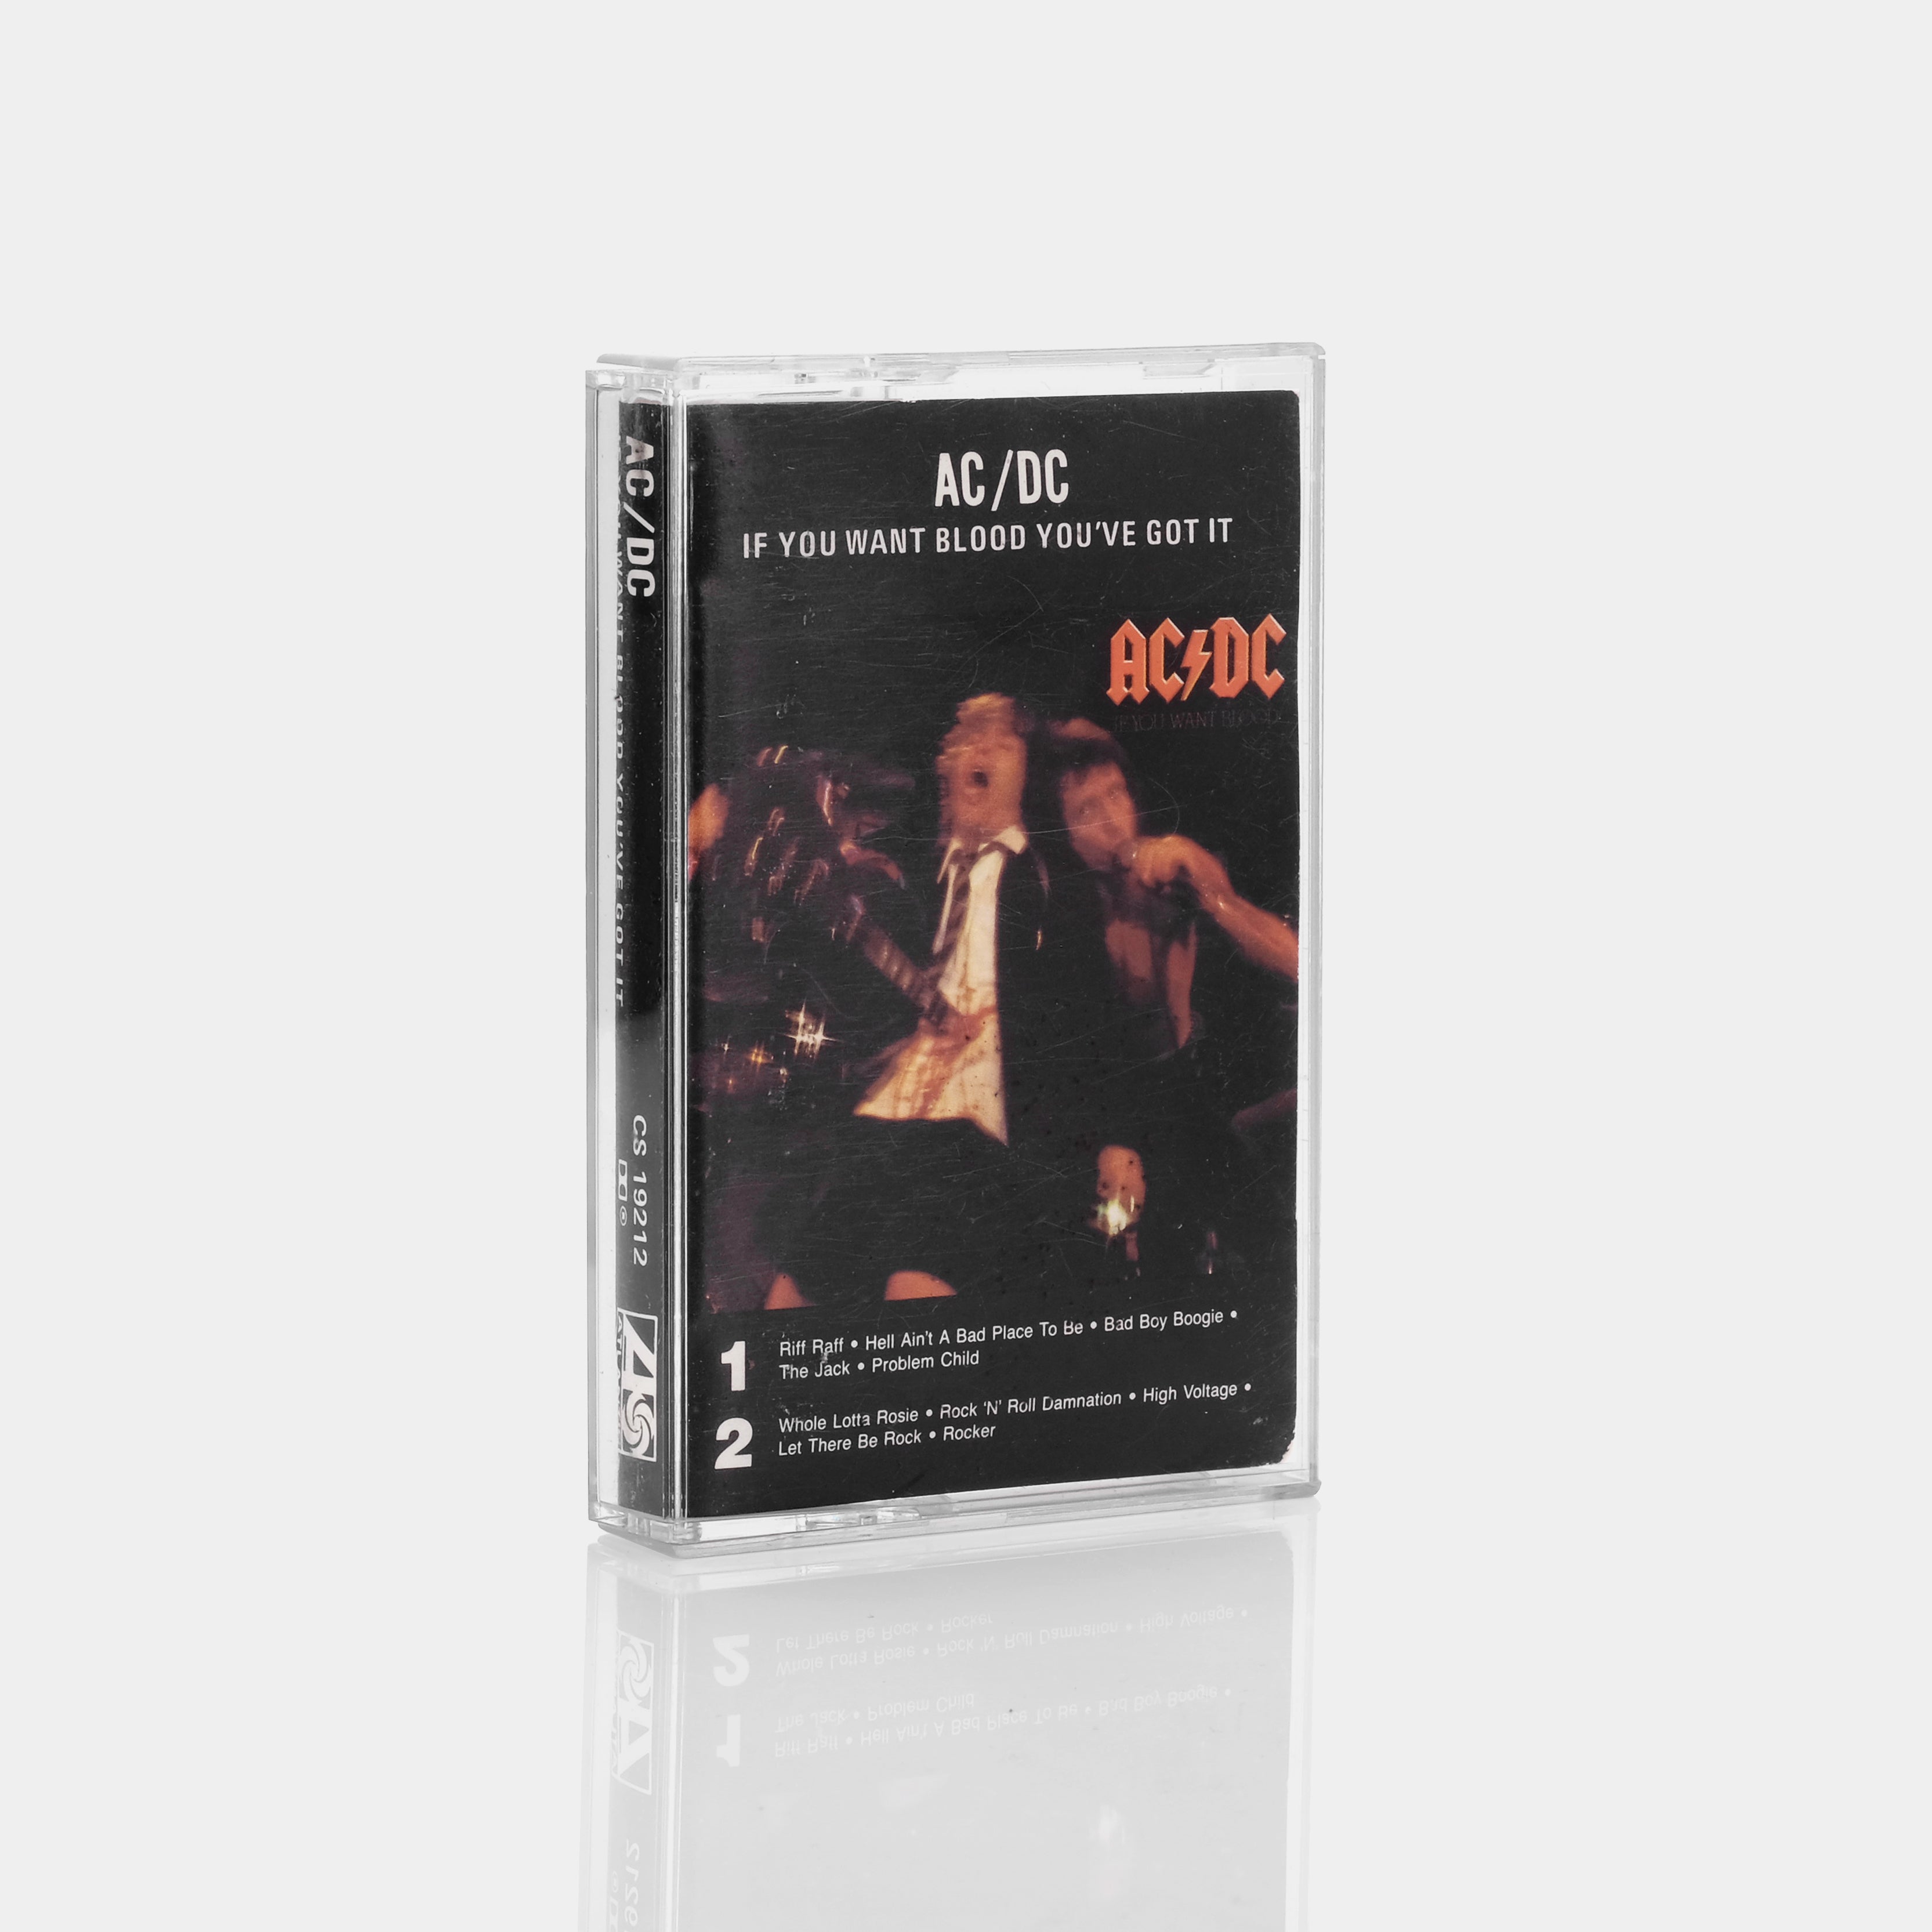 AC/DC - If You Want Blood You've Got It Cassette Tape